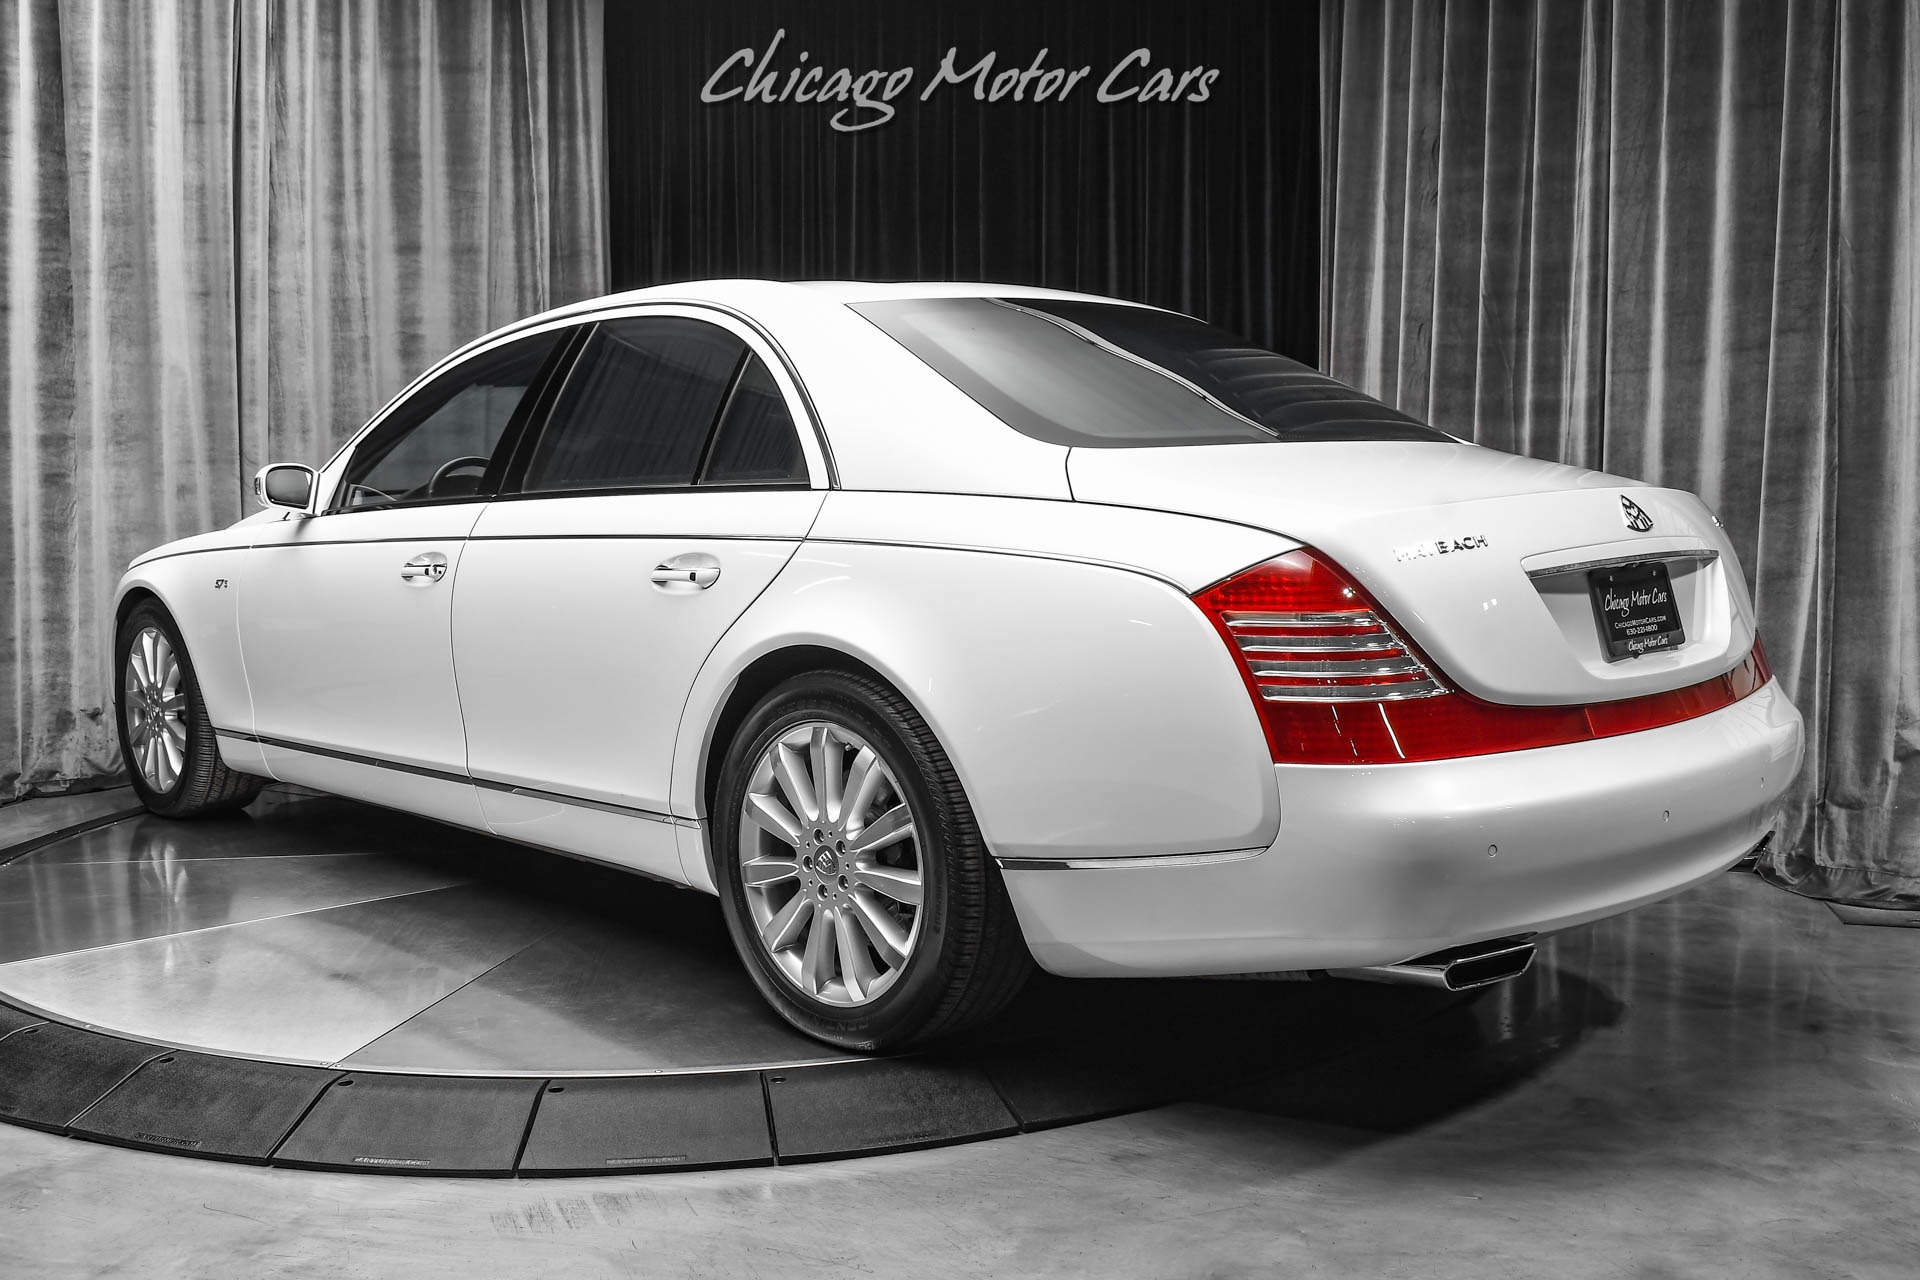 Used 2007 Maybach Maybach S with VIN WDBVF79J37A001980 for sale in West Chicago, IL